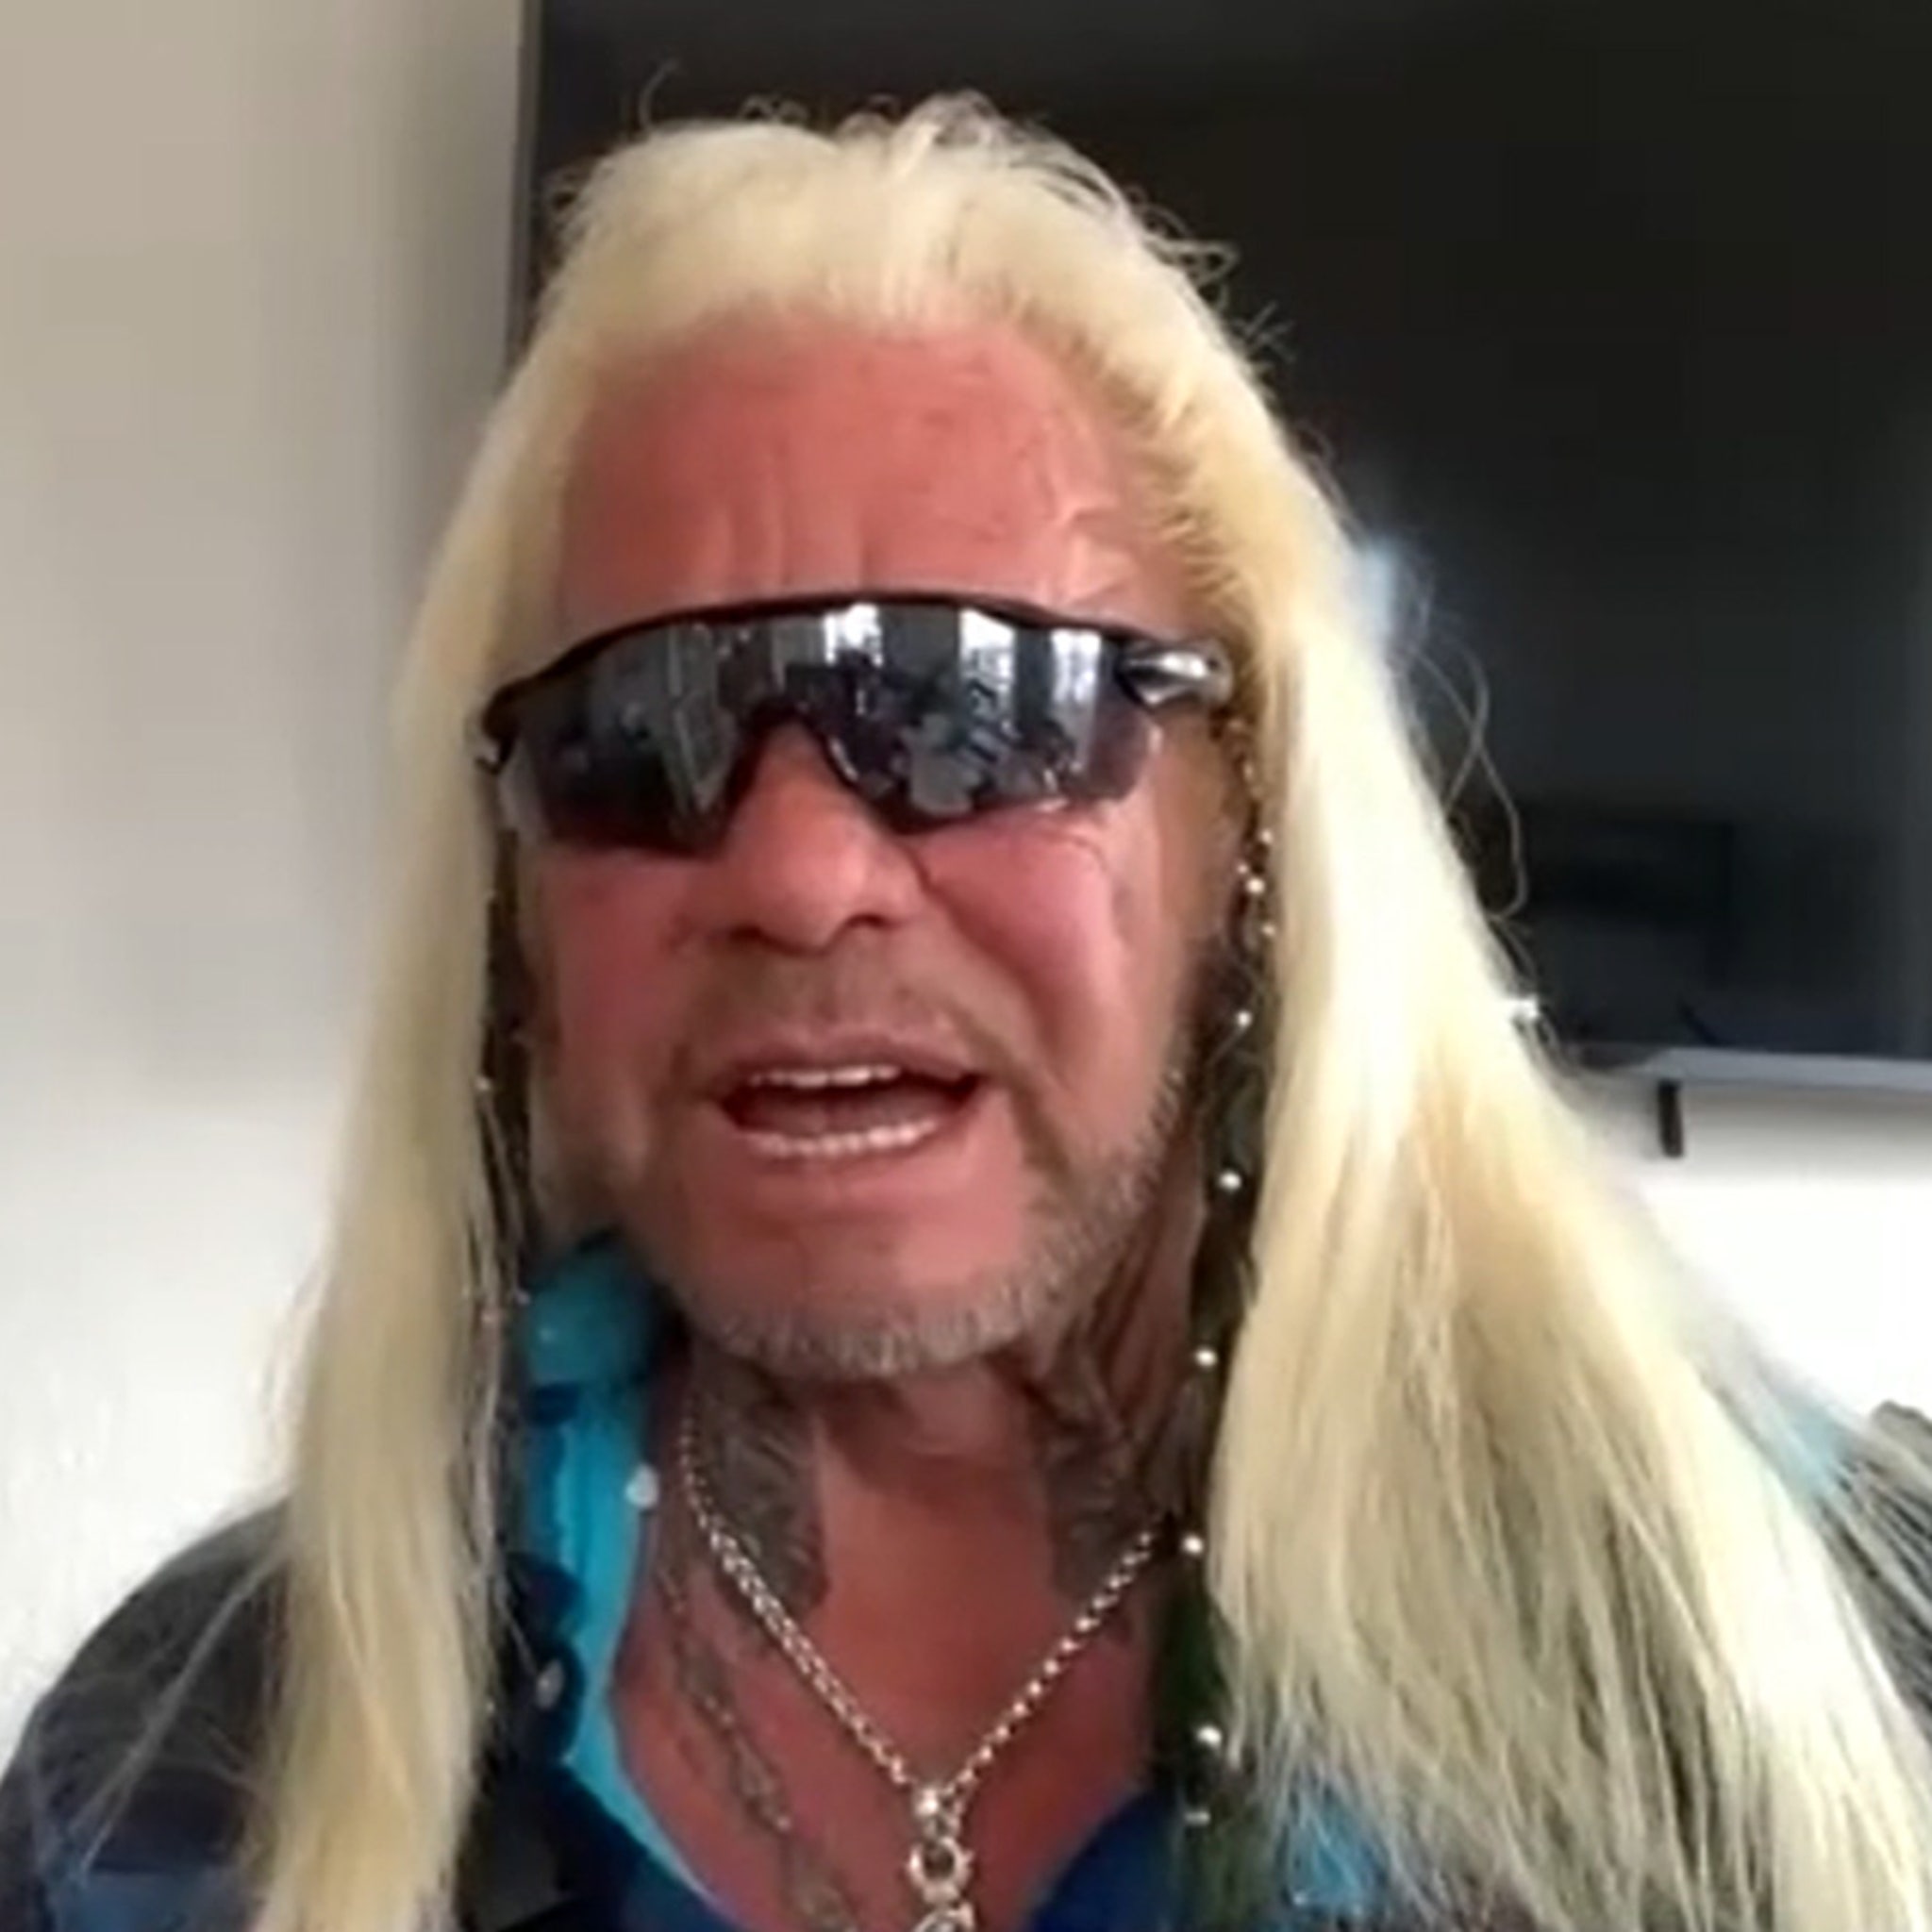 Dog the Bounty Hunter, and other epic mullets